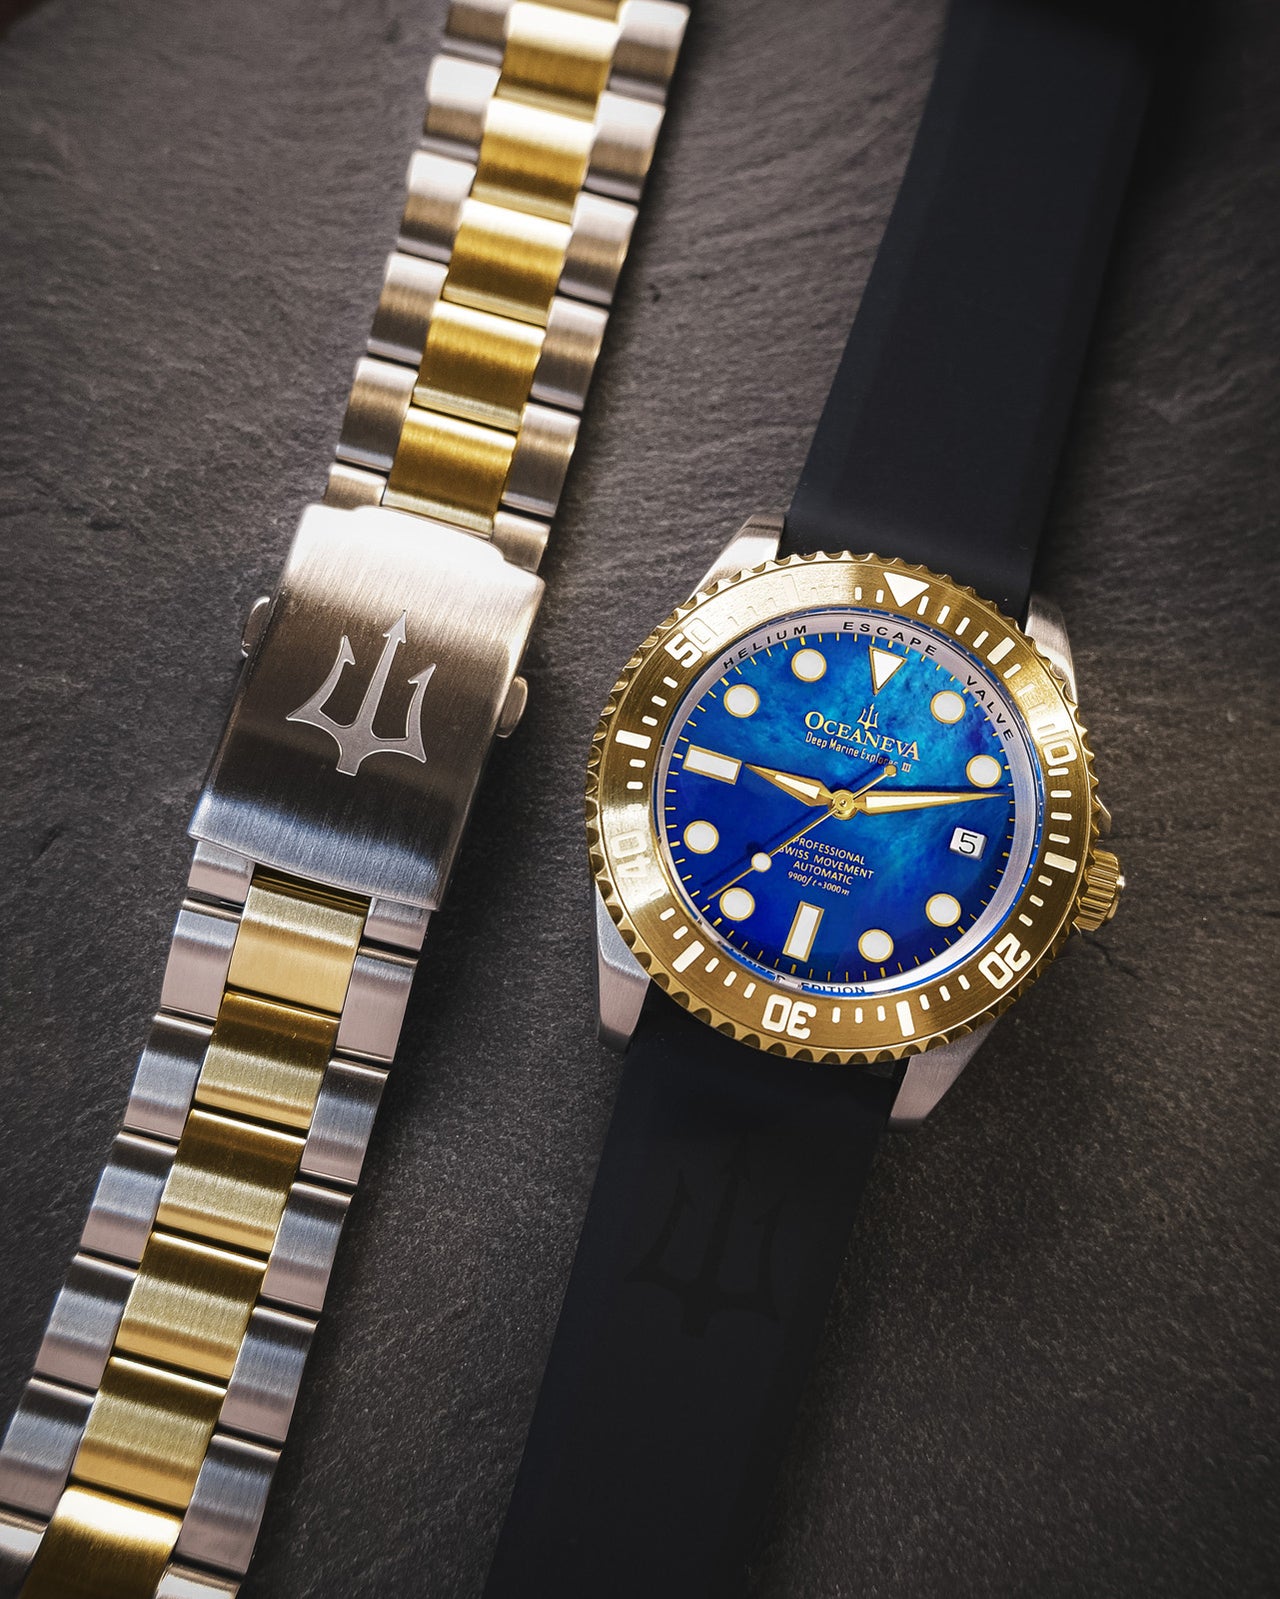 Oceaneva 3000M Dive Watch Blue Mother of Pearl and Gold Front Pictured With Rubber Strap